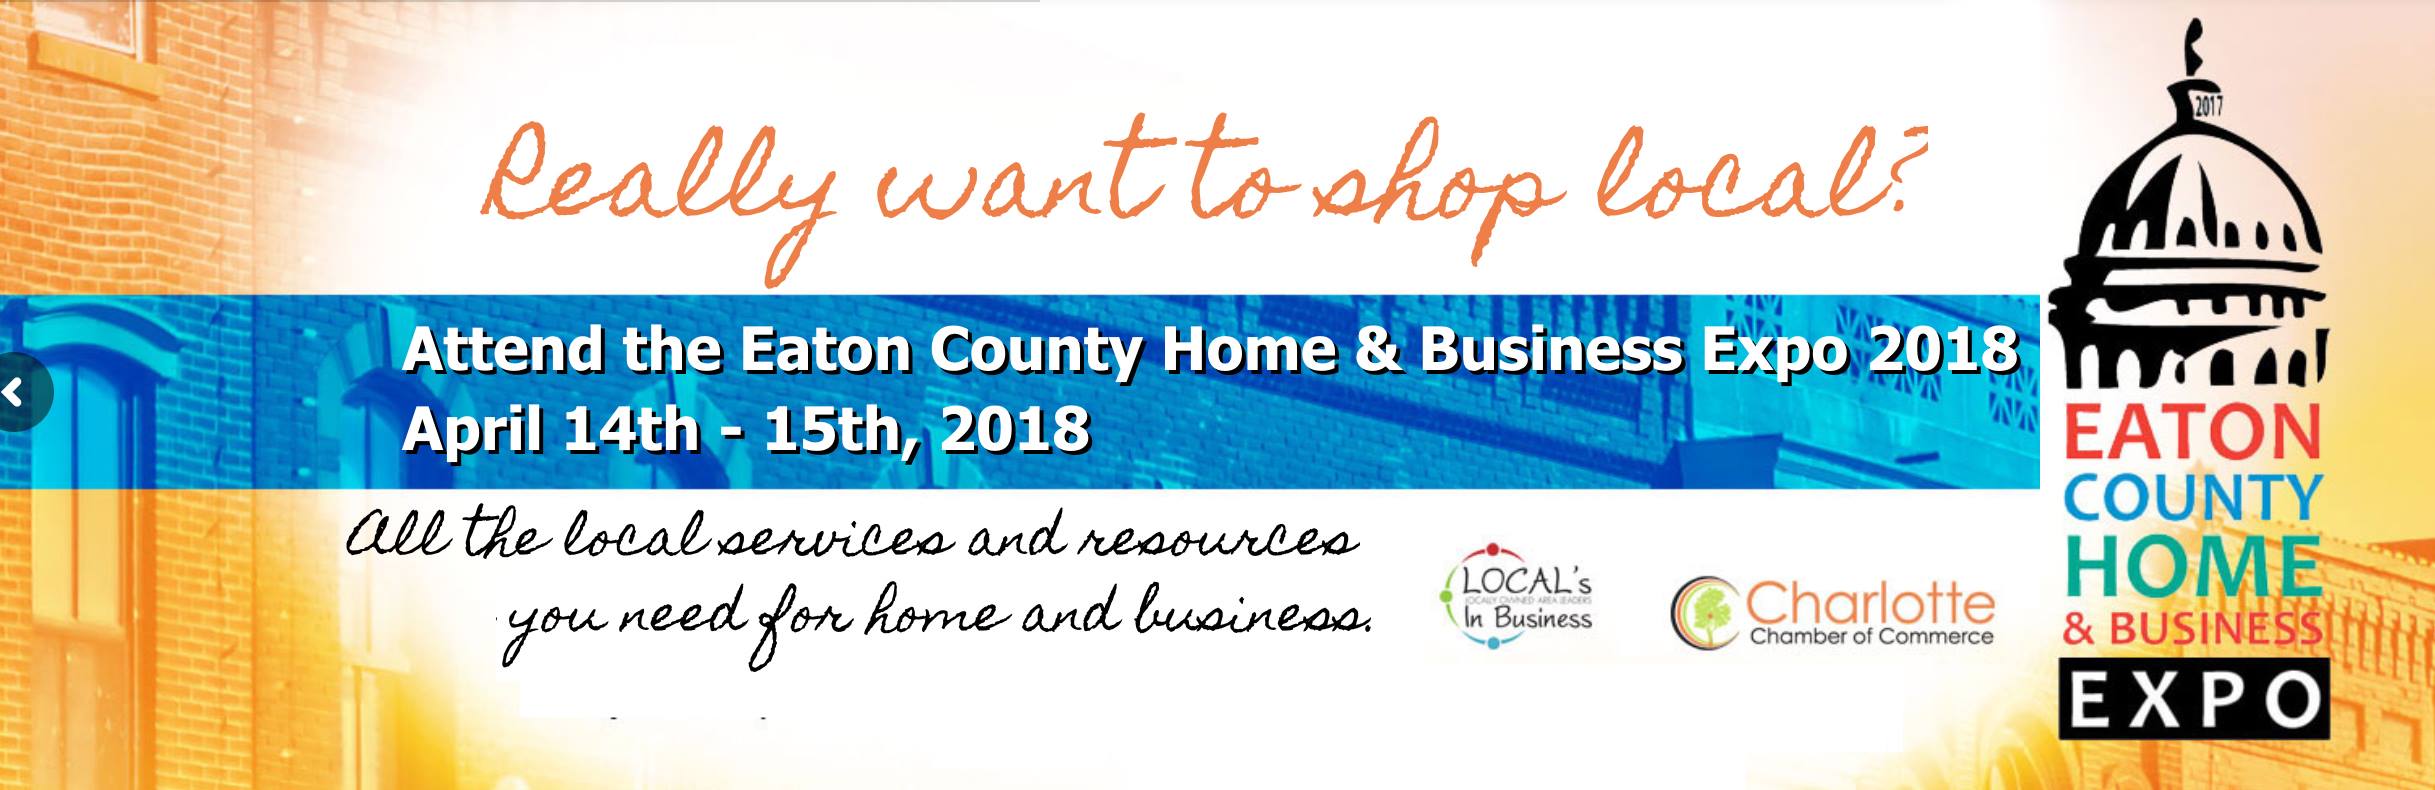 Eaton County Home and Business Expo 2018